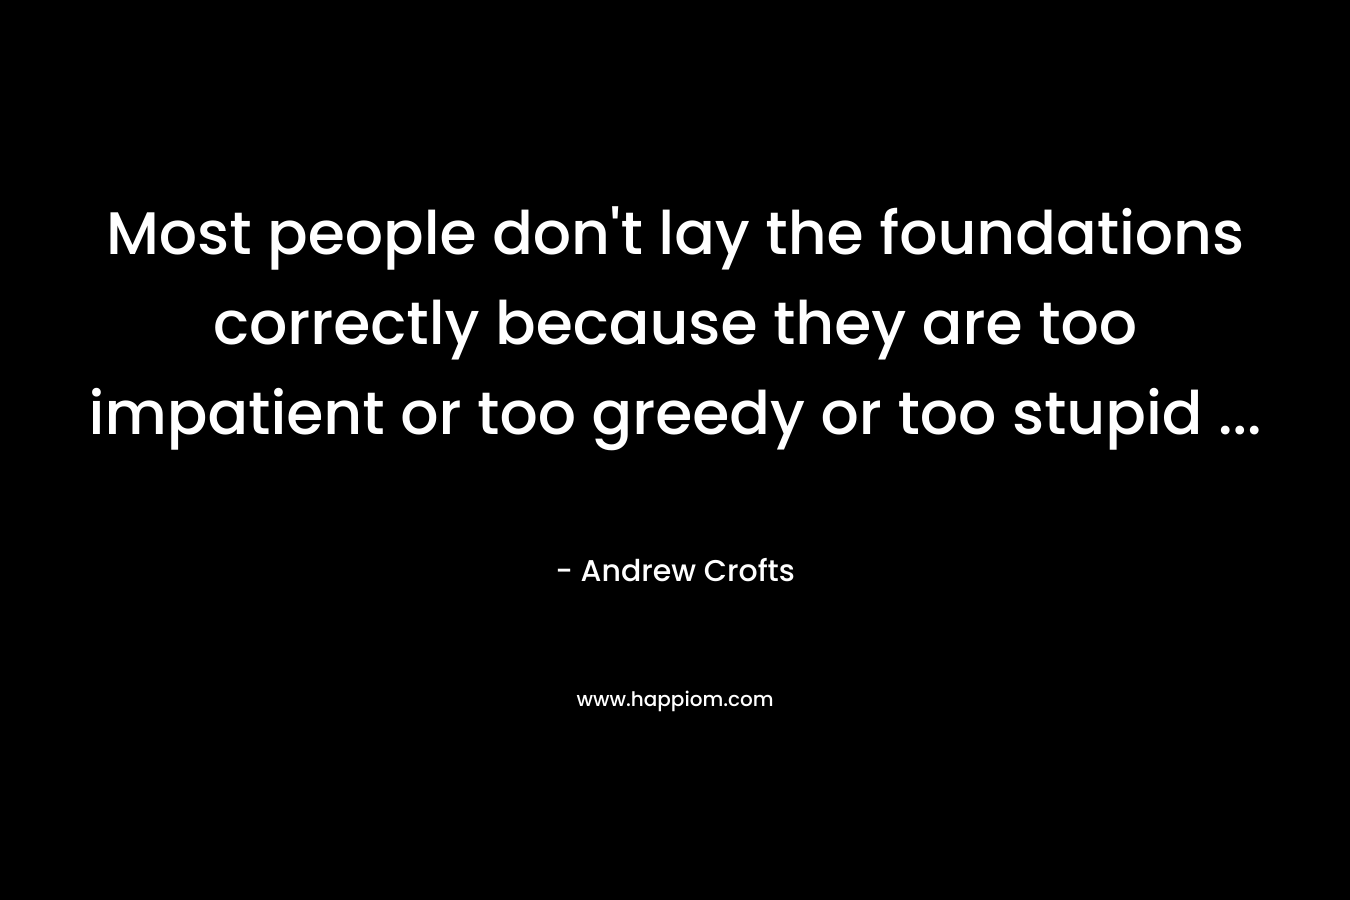 Most people don't lay the foundations correctly because they are too impatient or too greedy or too stupid ...